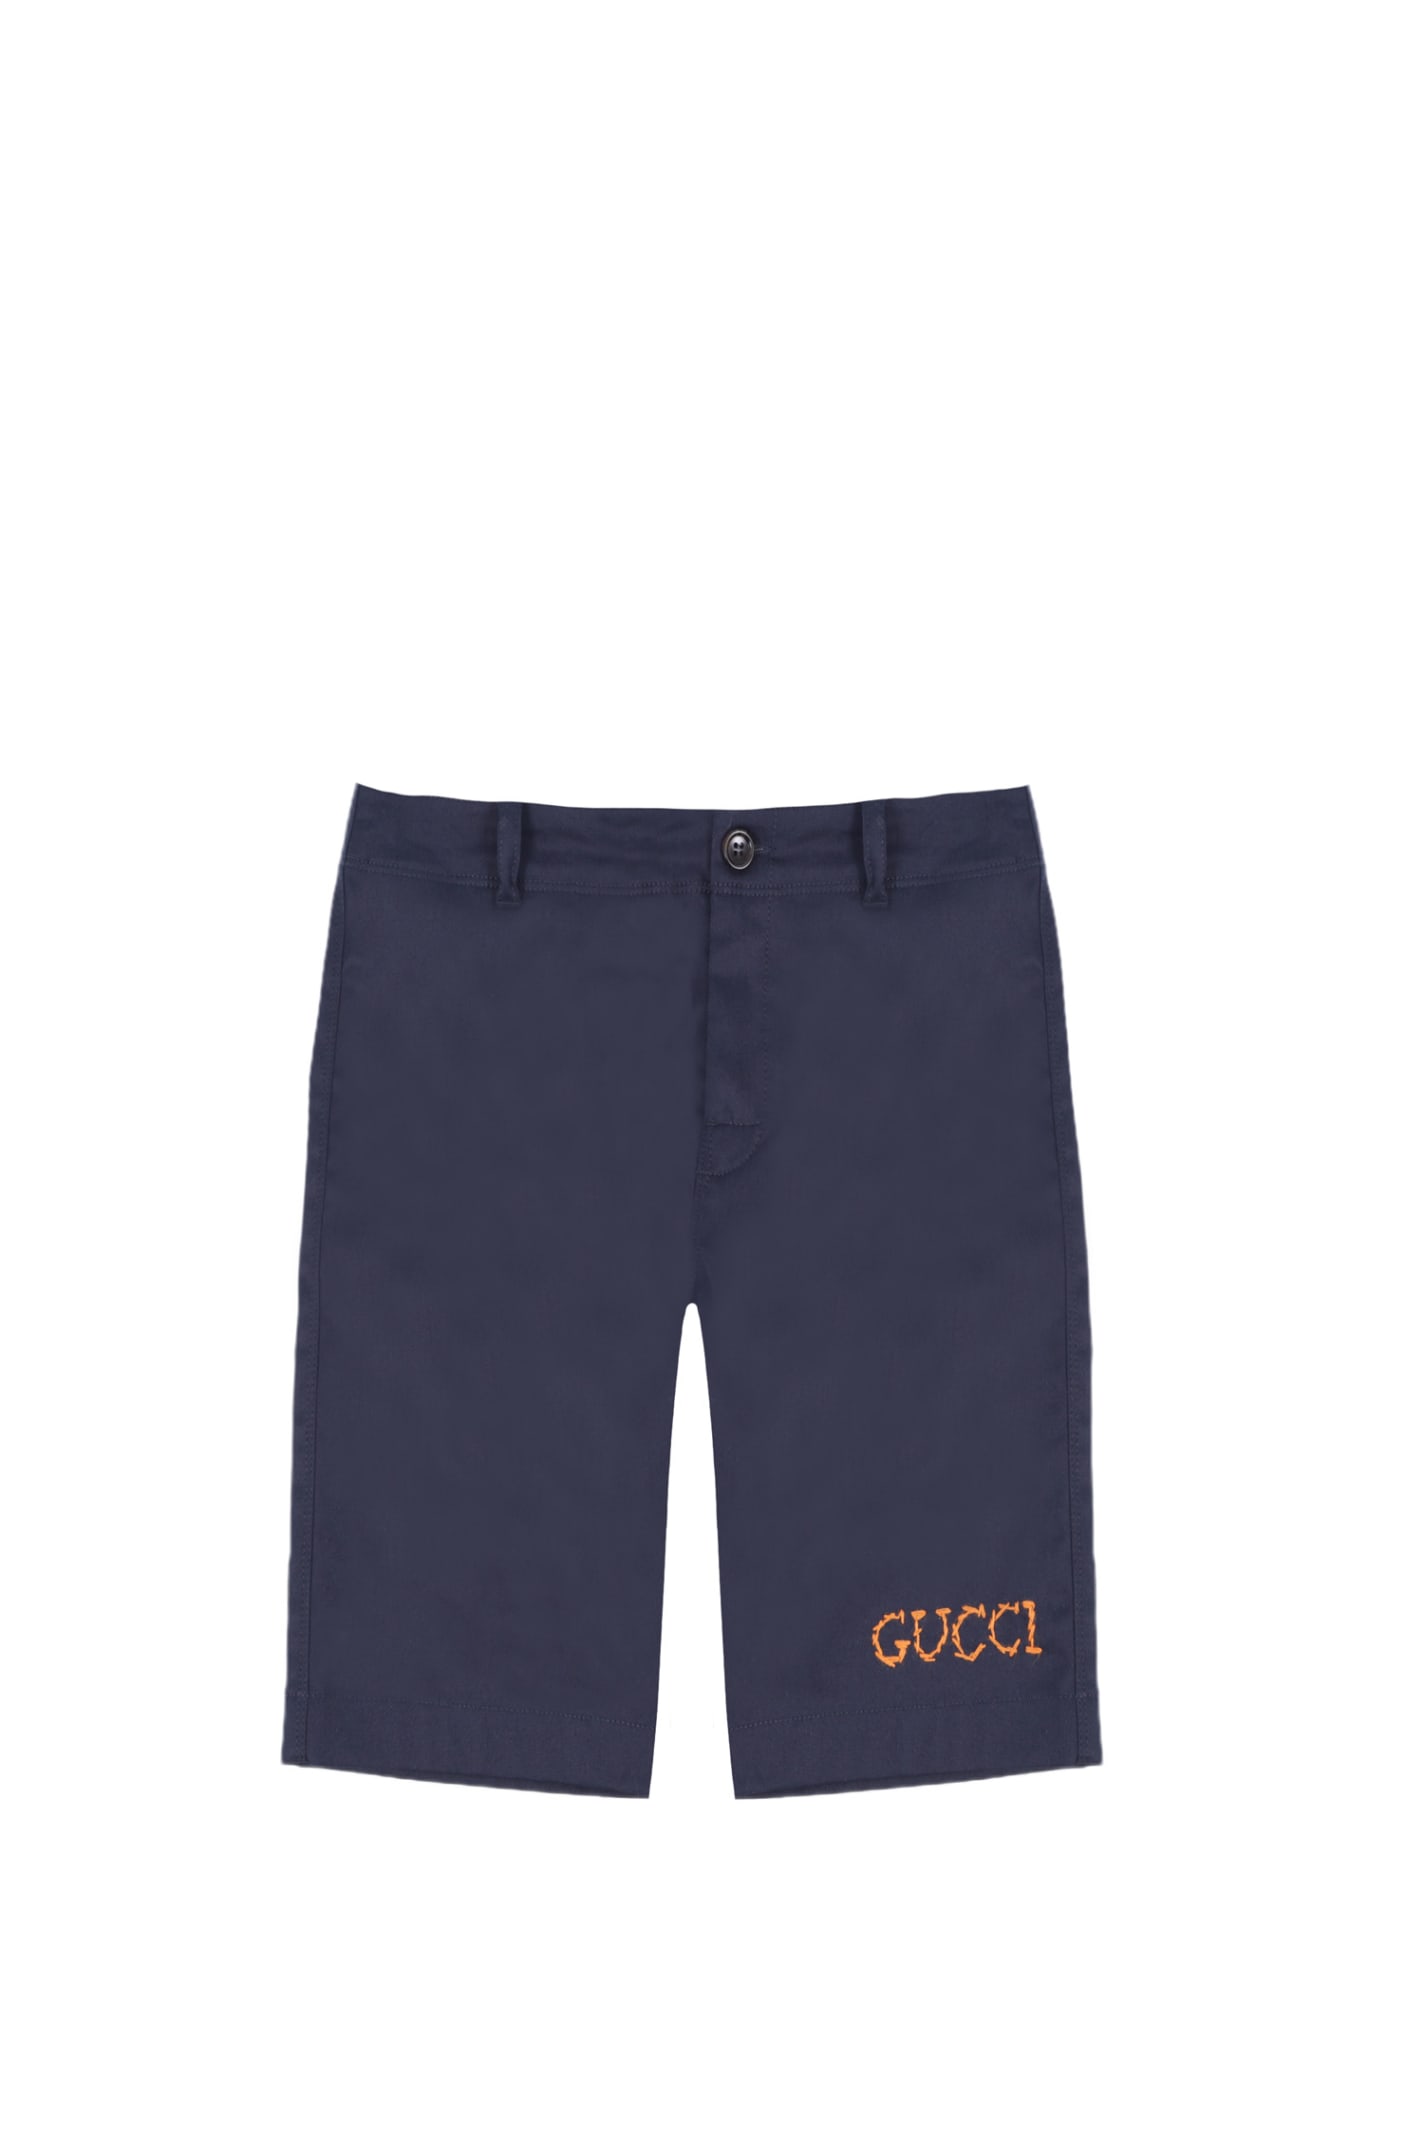 Gucci Kids' Cotton Shorts In Blue